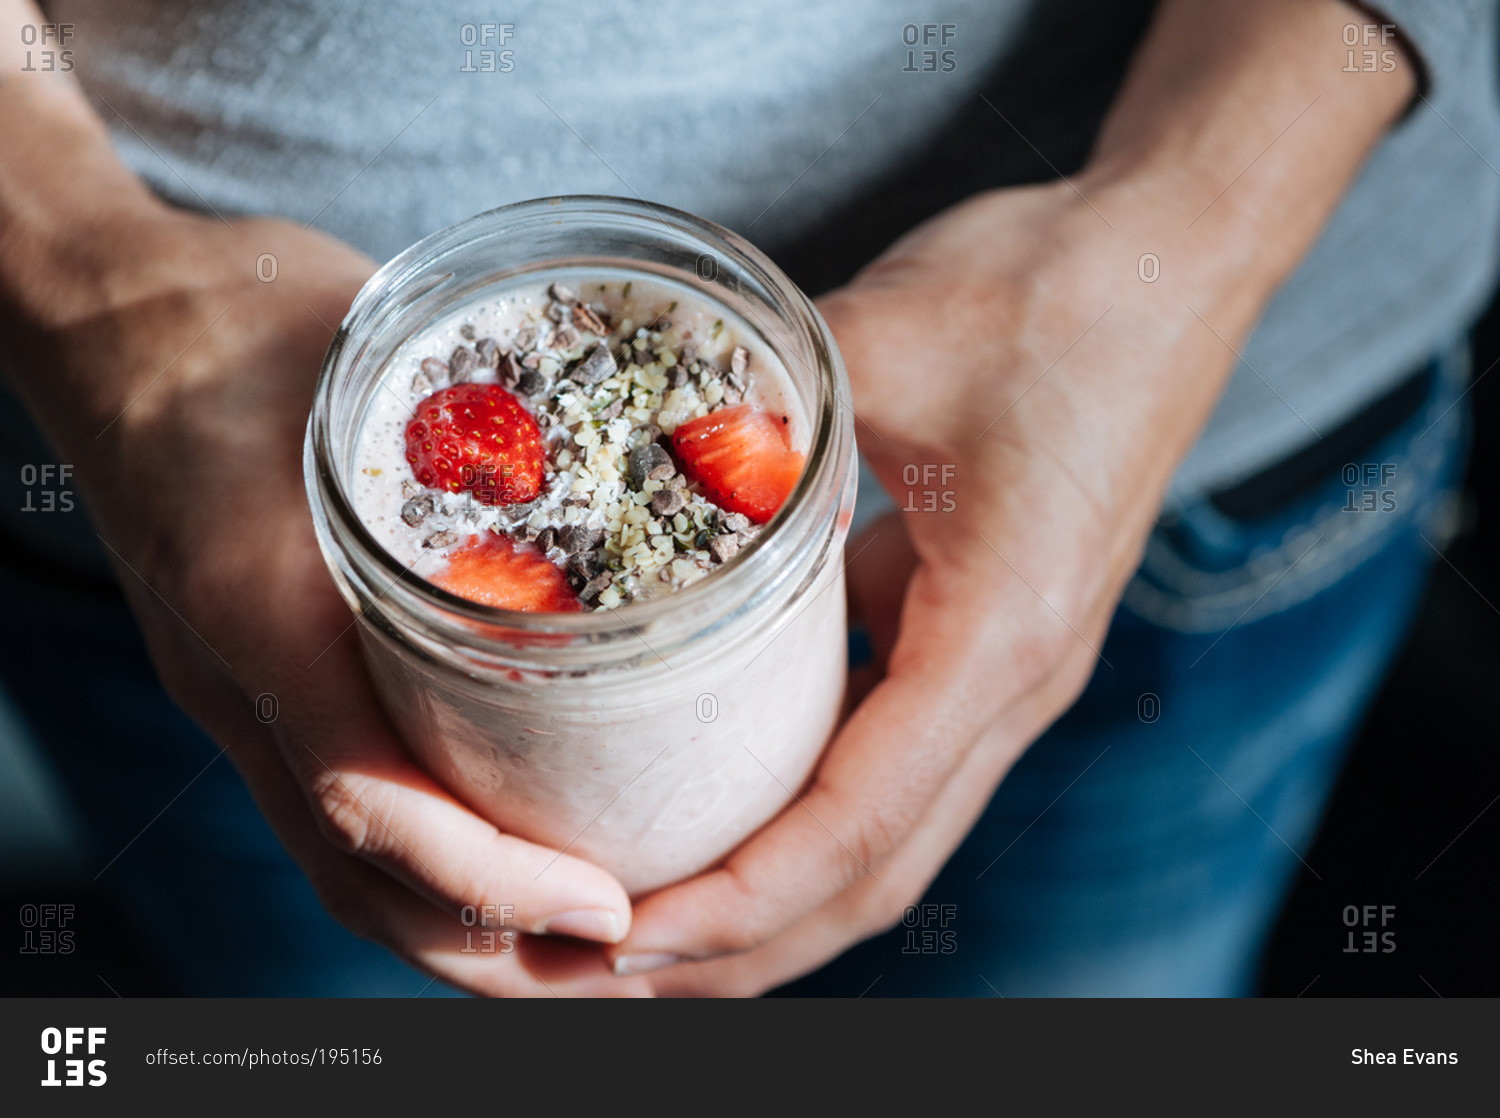 Man holding fresh fruit smoothie with strawberries, cacao nibs